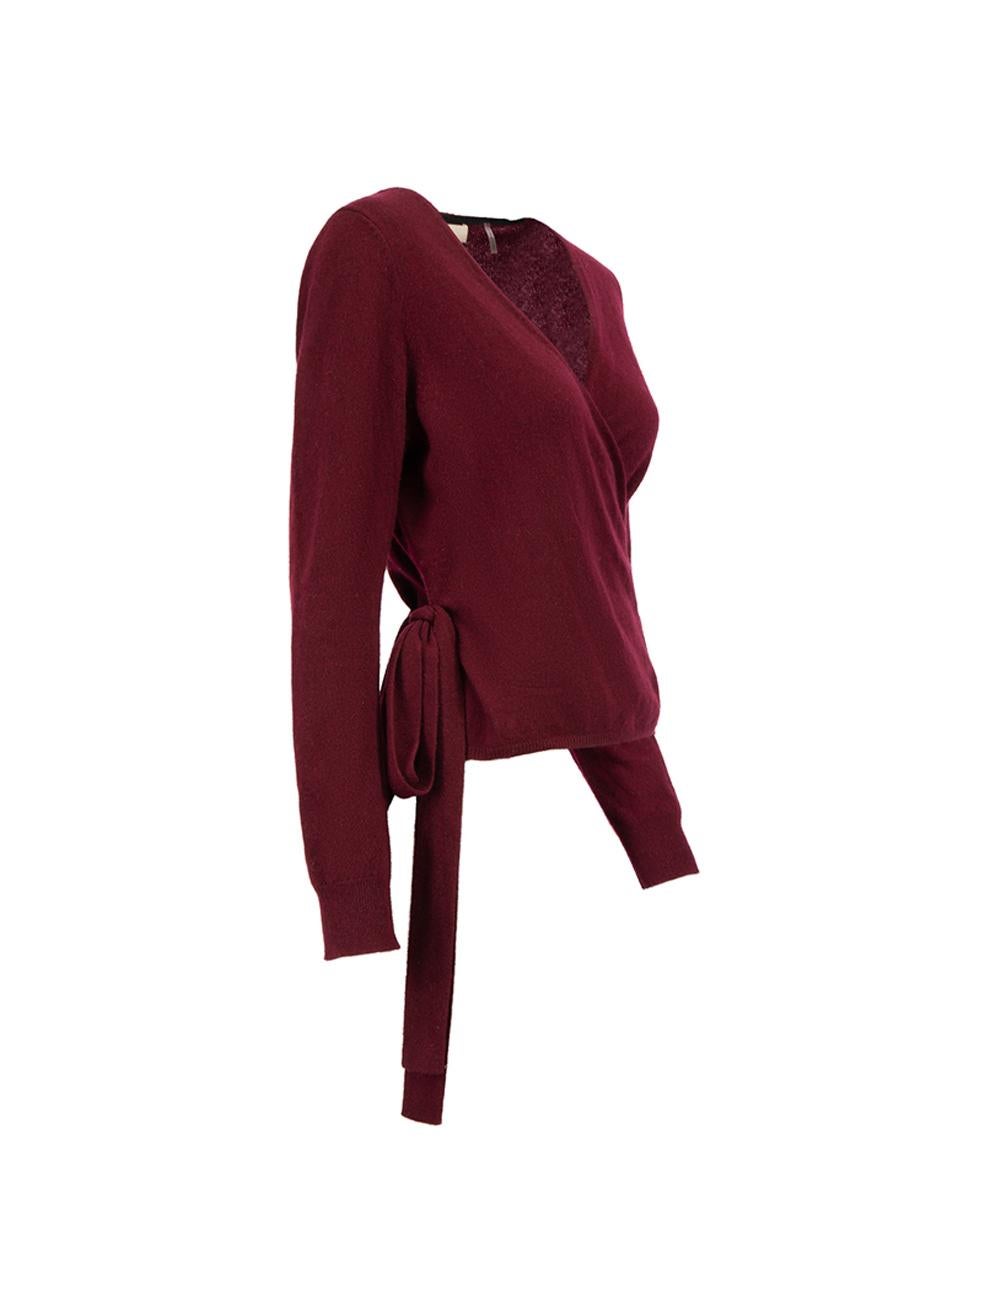 CONDITION is Very good. Minimal wear to knitwear is evident. Minimal wear to knit with very light pilling throughout on this used Diane Von Furstenberg designer resale item.



Details


Burgundy

Cashmere

Wrap cardigan

Long